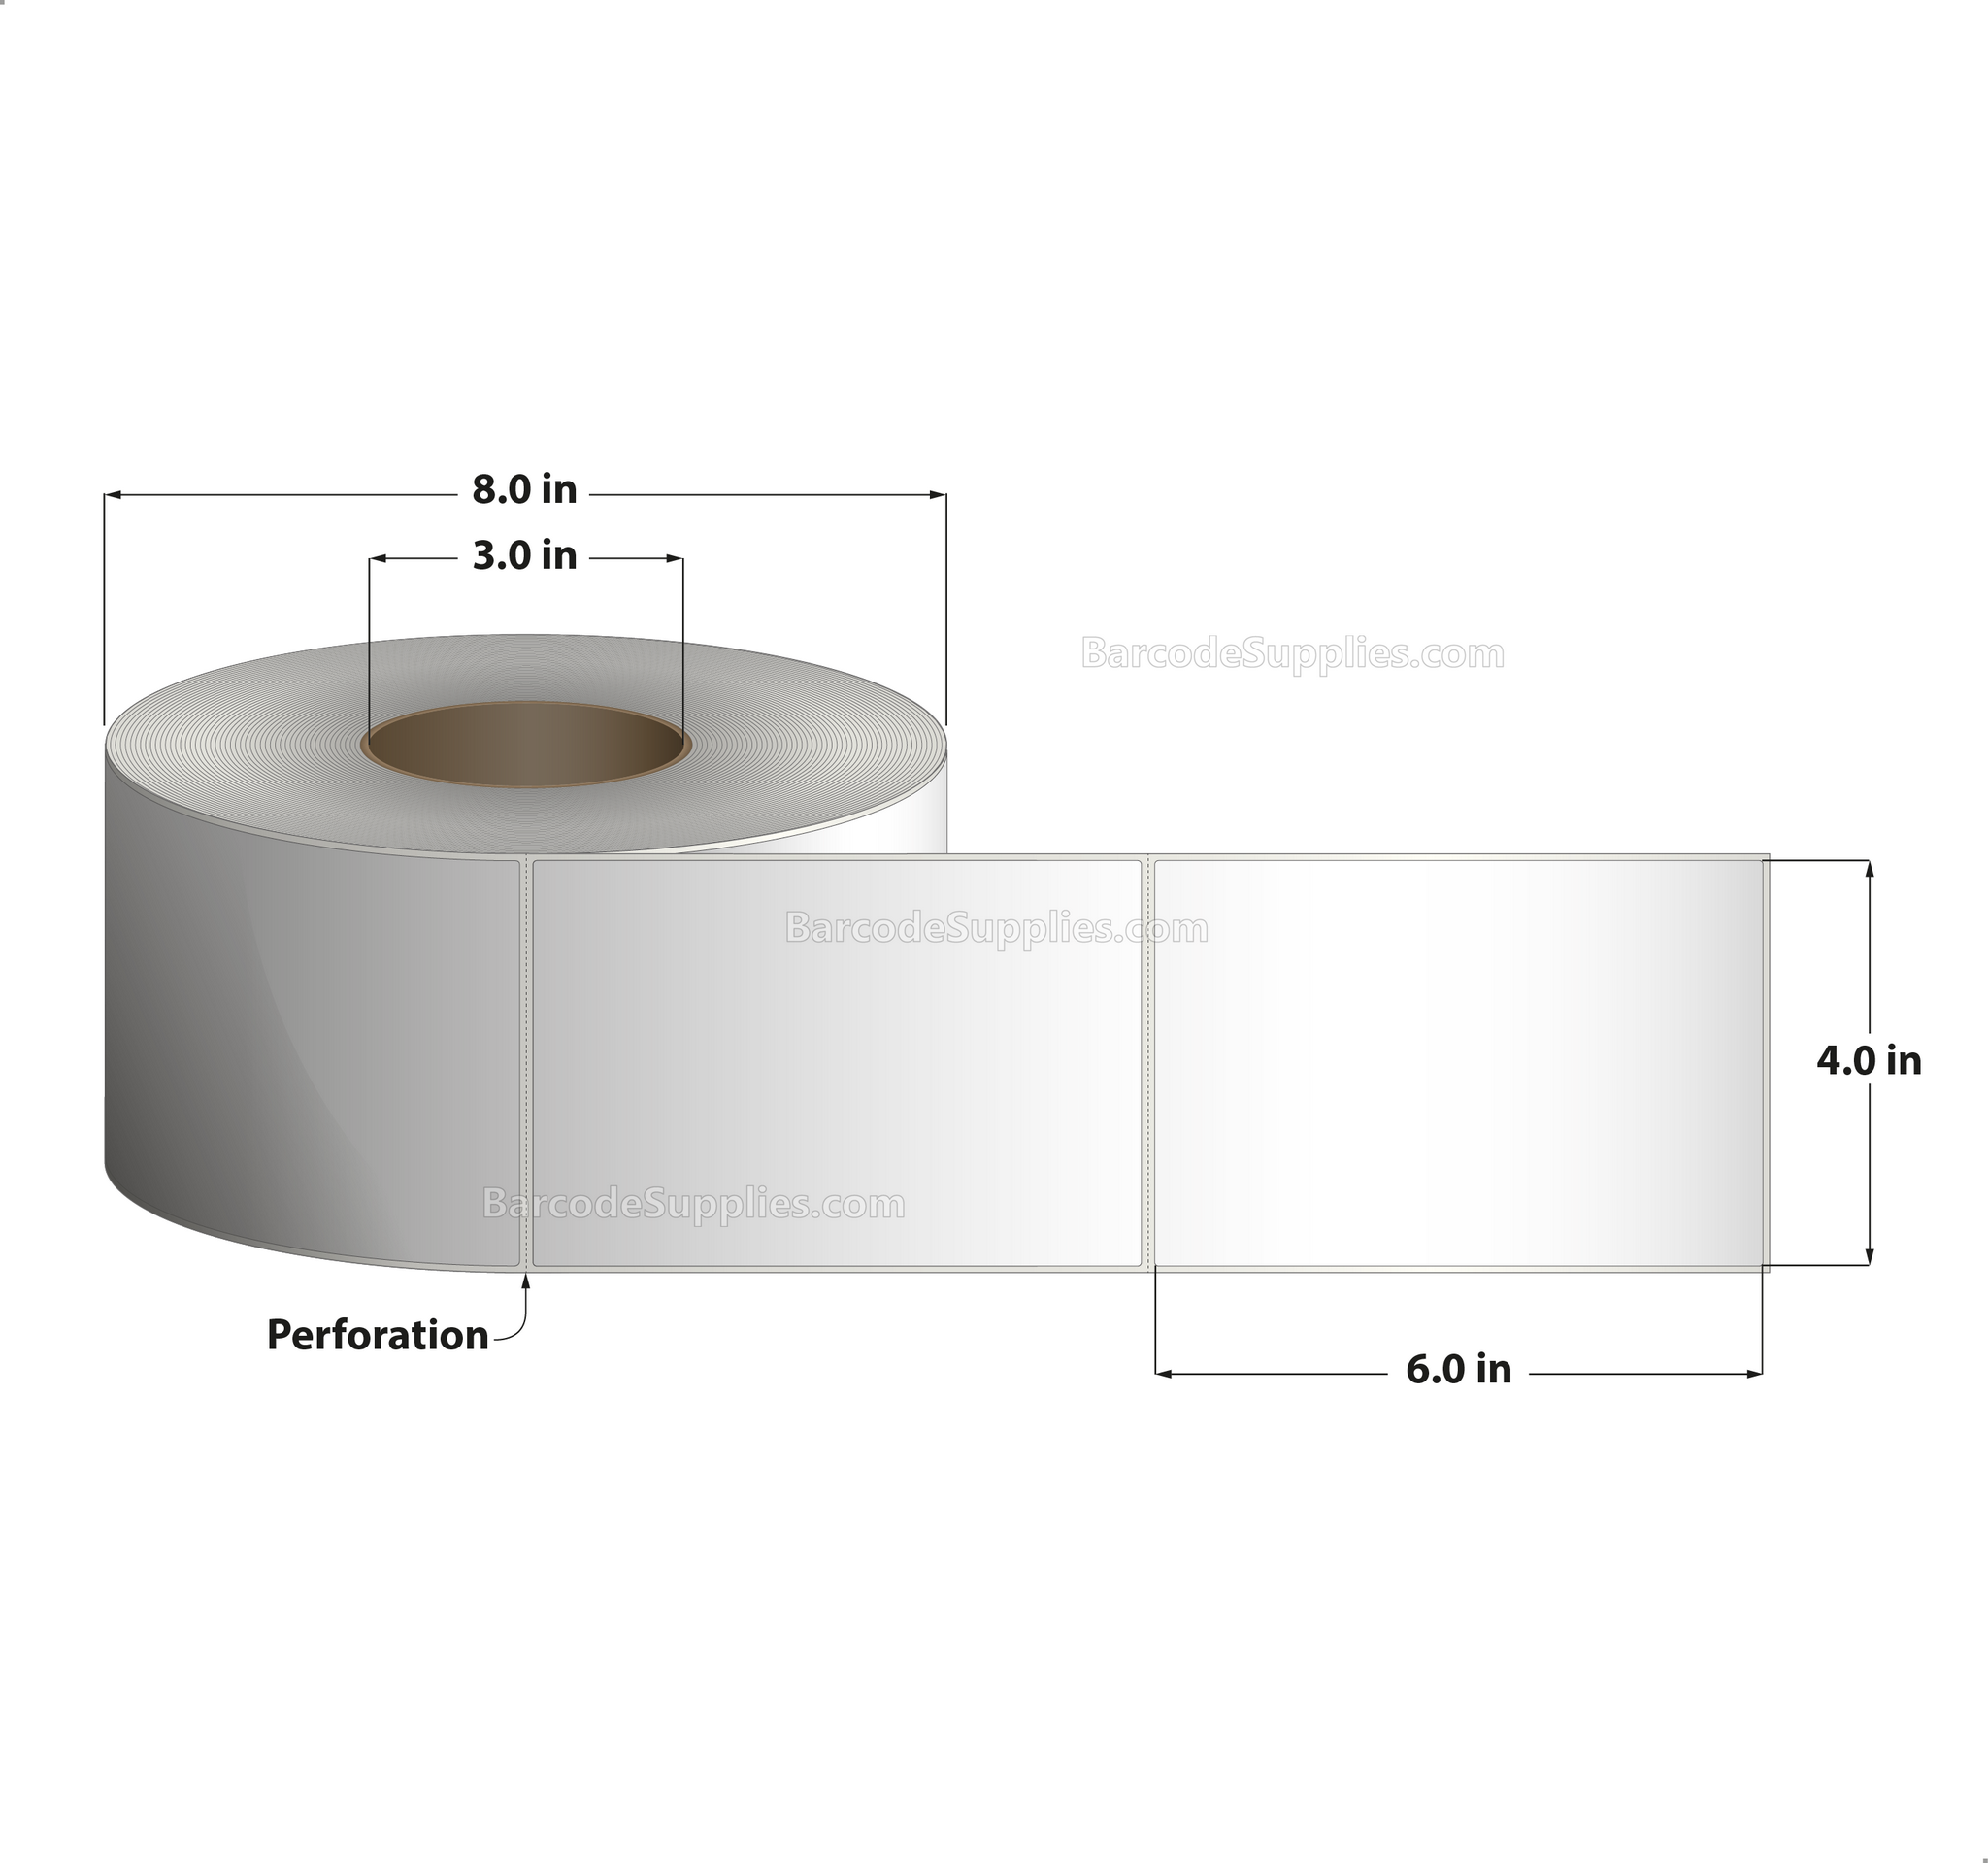 4 x 6 Direct Thermal White Labels With Acrylic Adhesive - Perforated - 1000 Labels Per Roll - Carton Of 4 Rolls - 4000 Labels Total - MPN: RD-4-6-1000-3 - BarcodeSource, Inc.